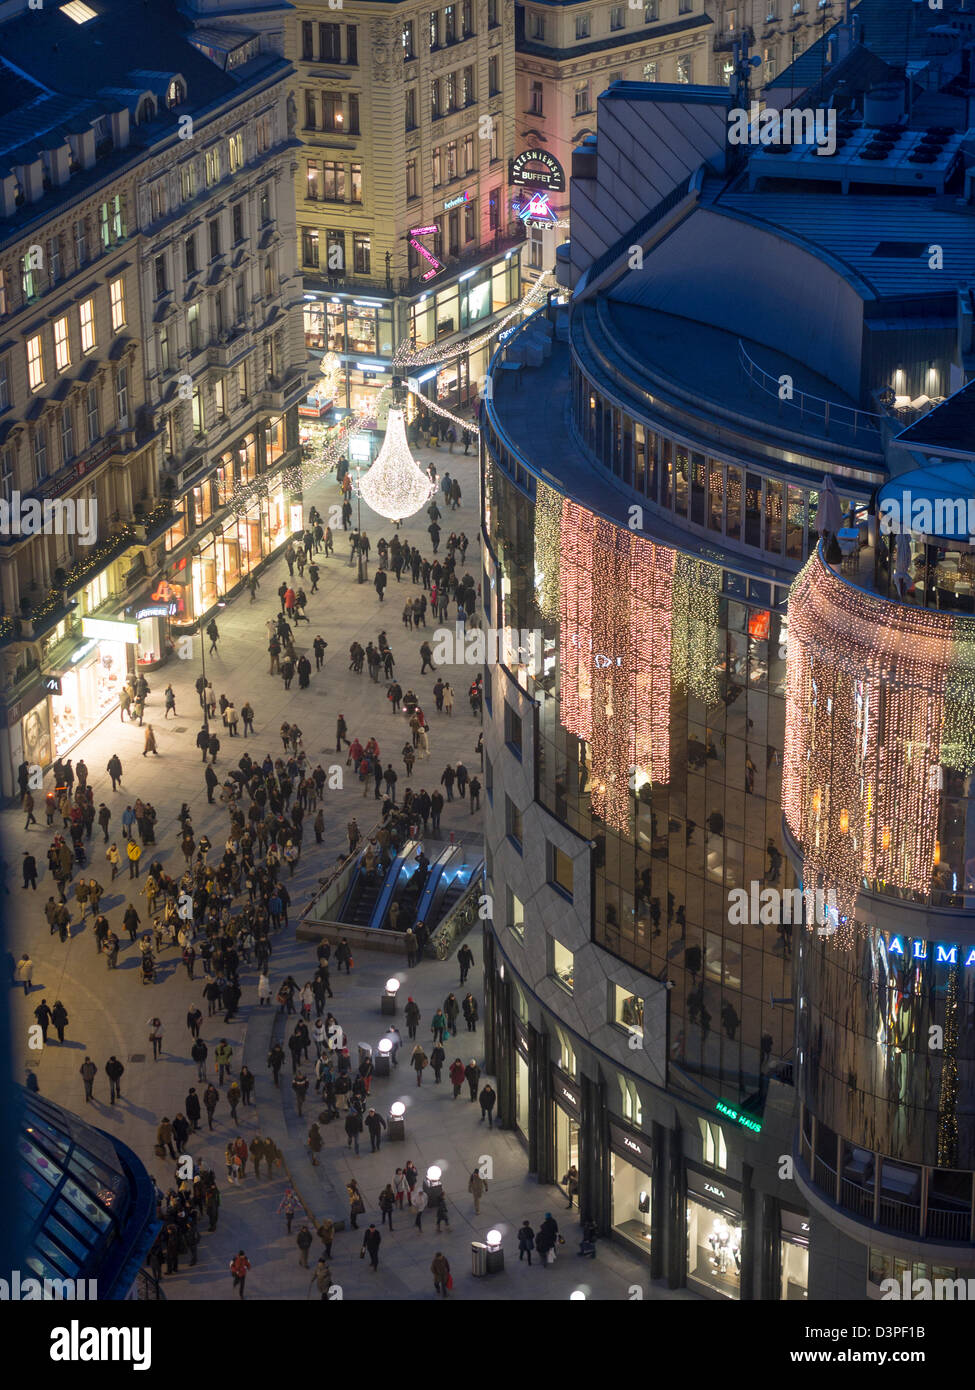 Vienna Cityscape: Stephansplatz after dark. The view from the Stephansdom steeple of the square and its Christmas tree. Stock Photo